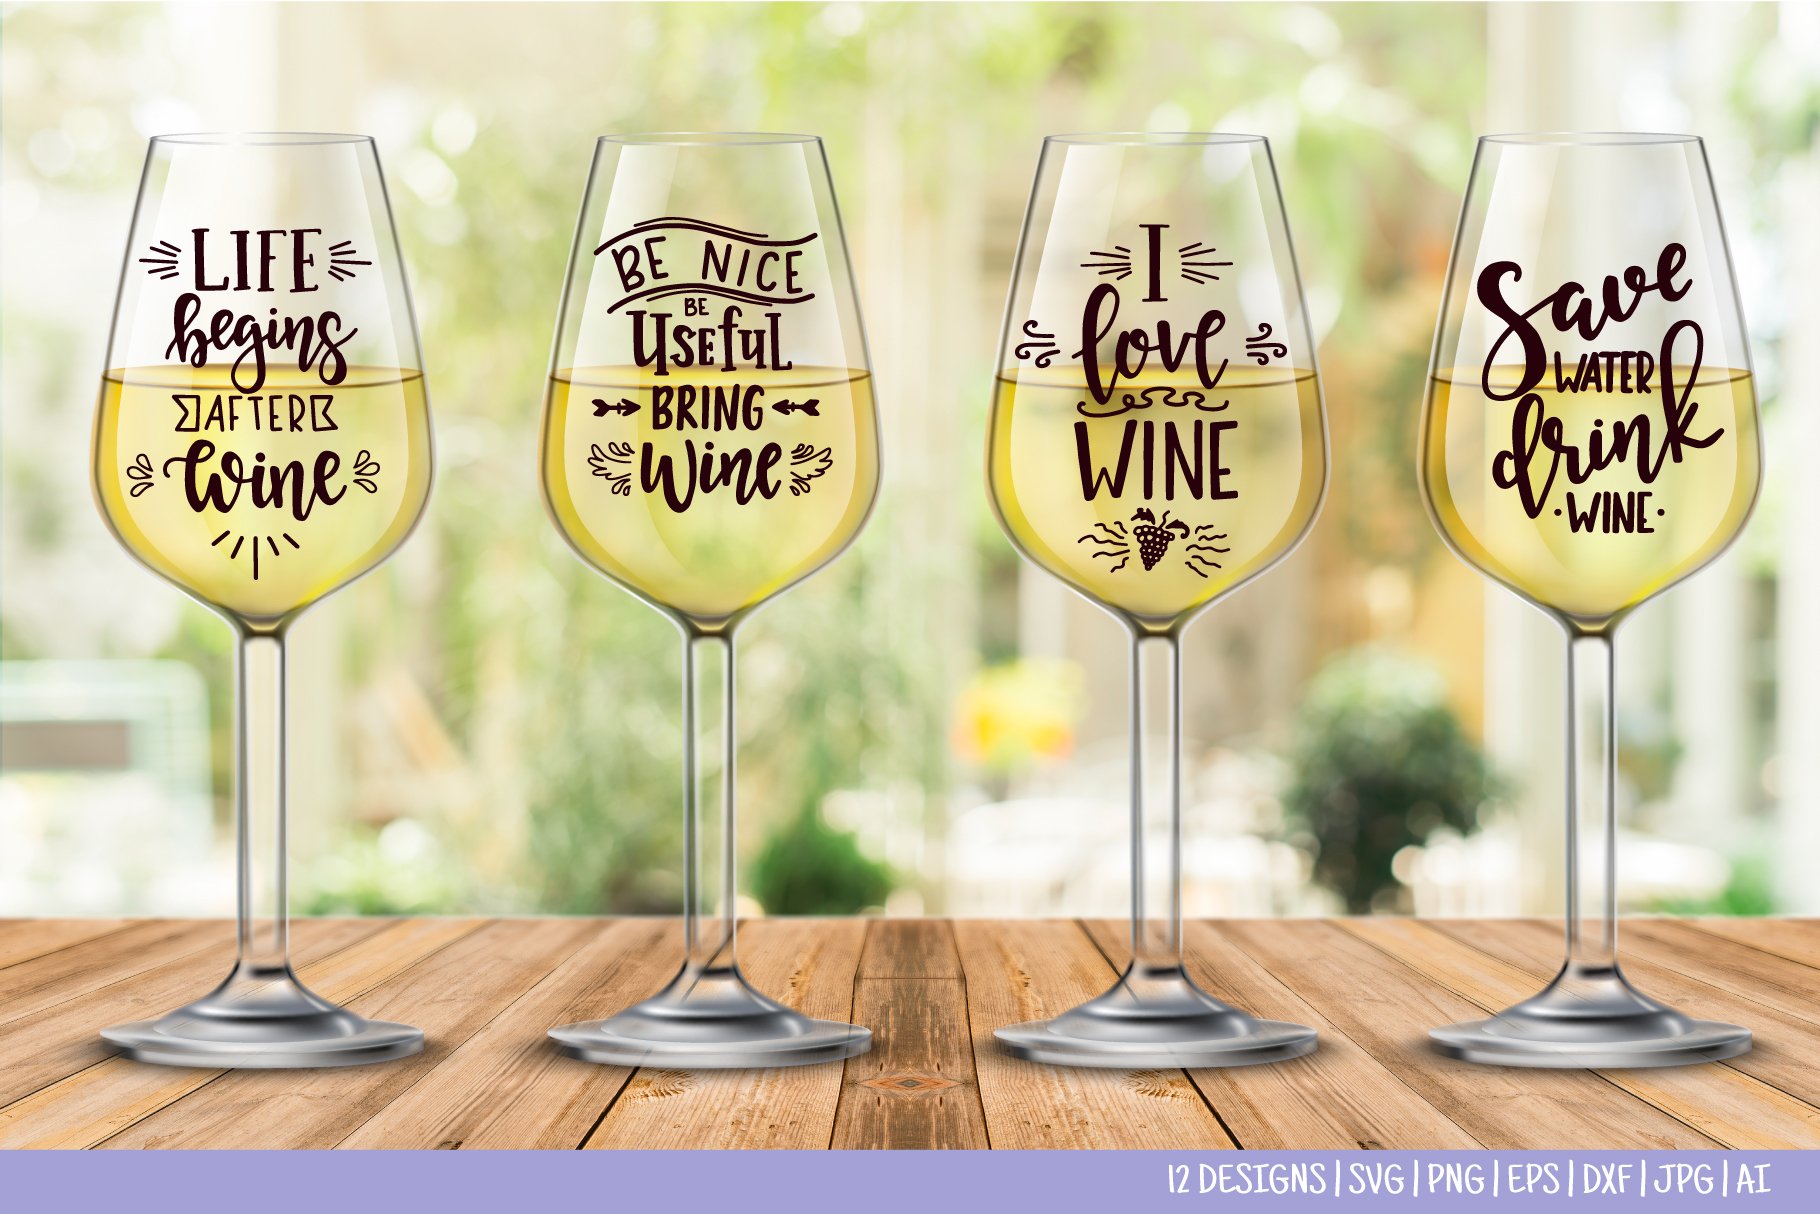 Four options of the wine glasses.